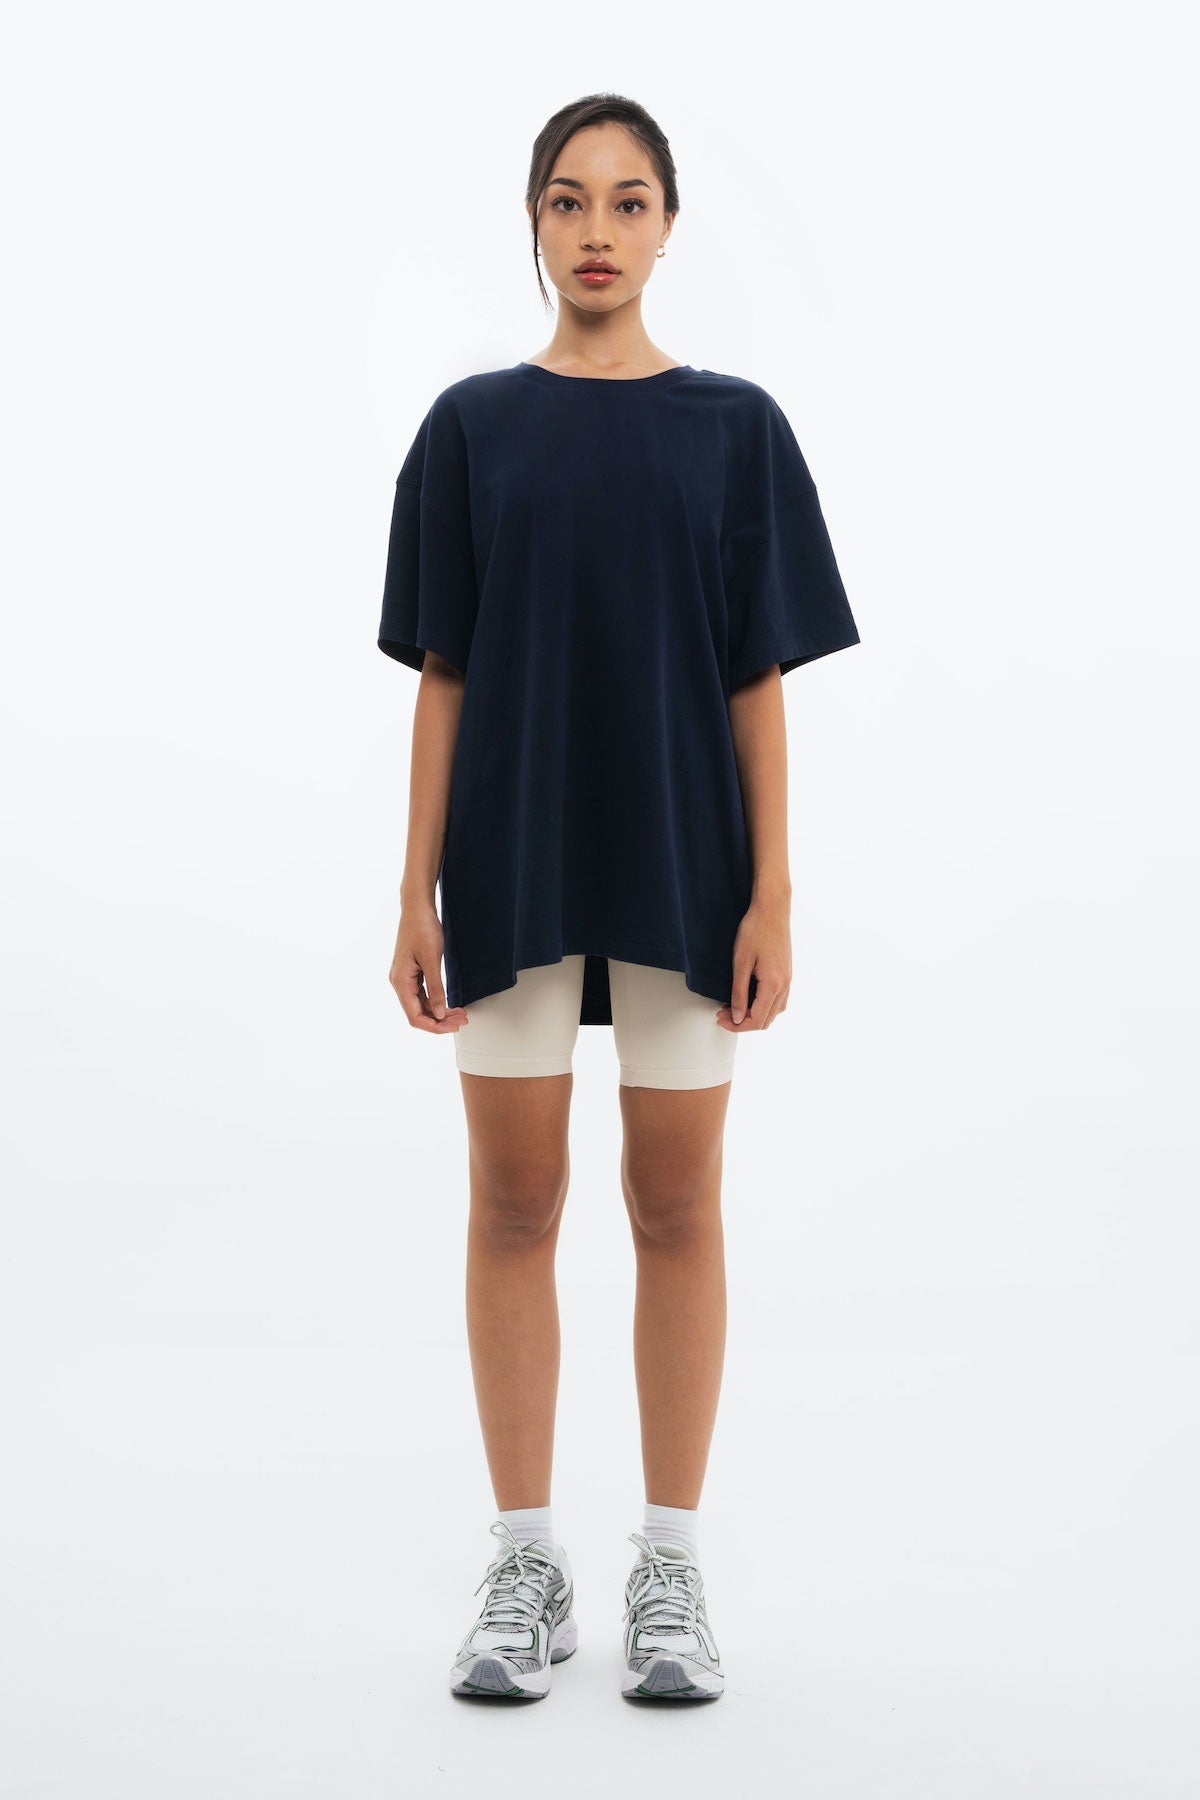 Flap T-Shirt in Navy